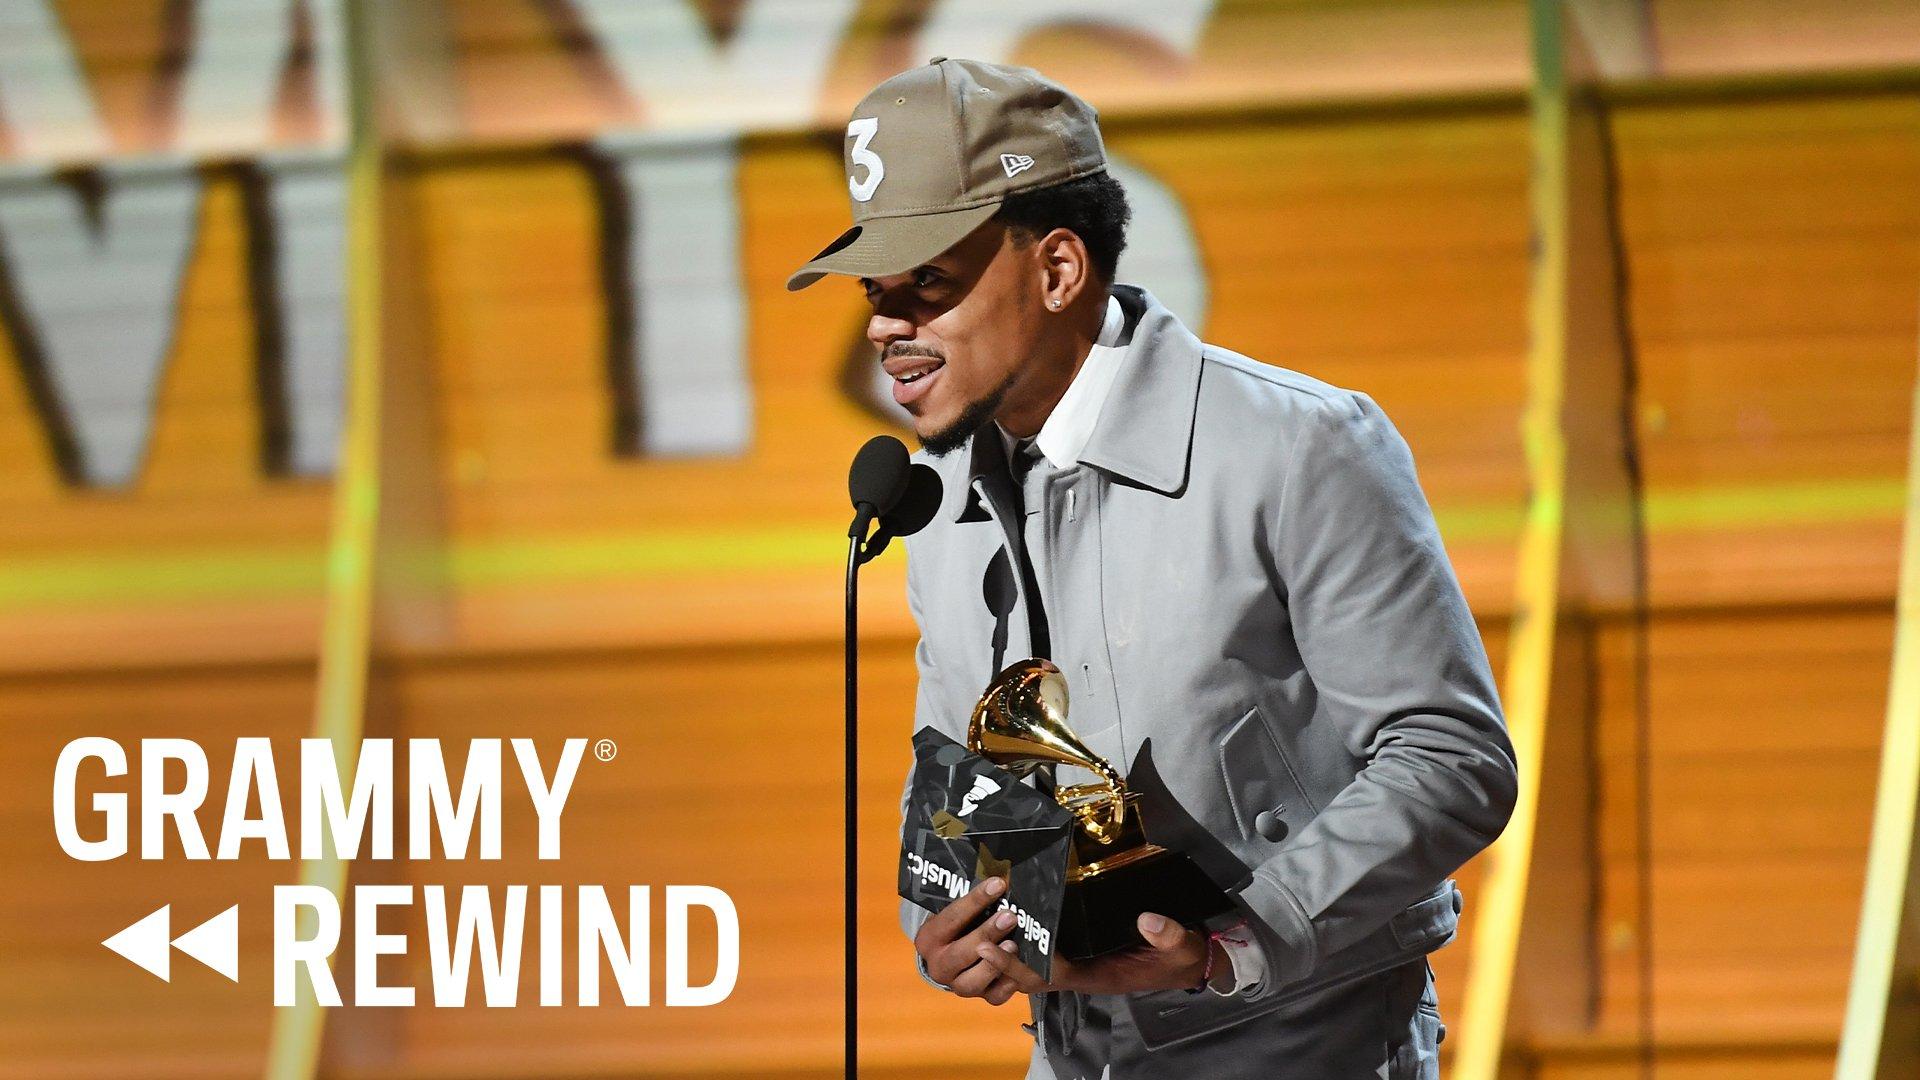 Chance the Rapper holding GRAMMY Award